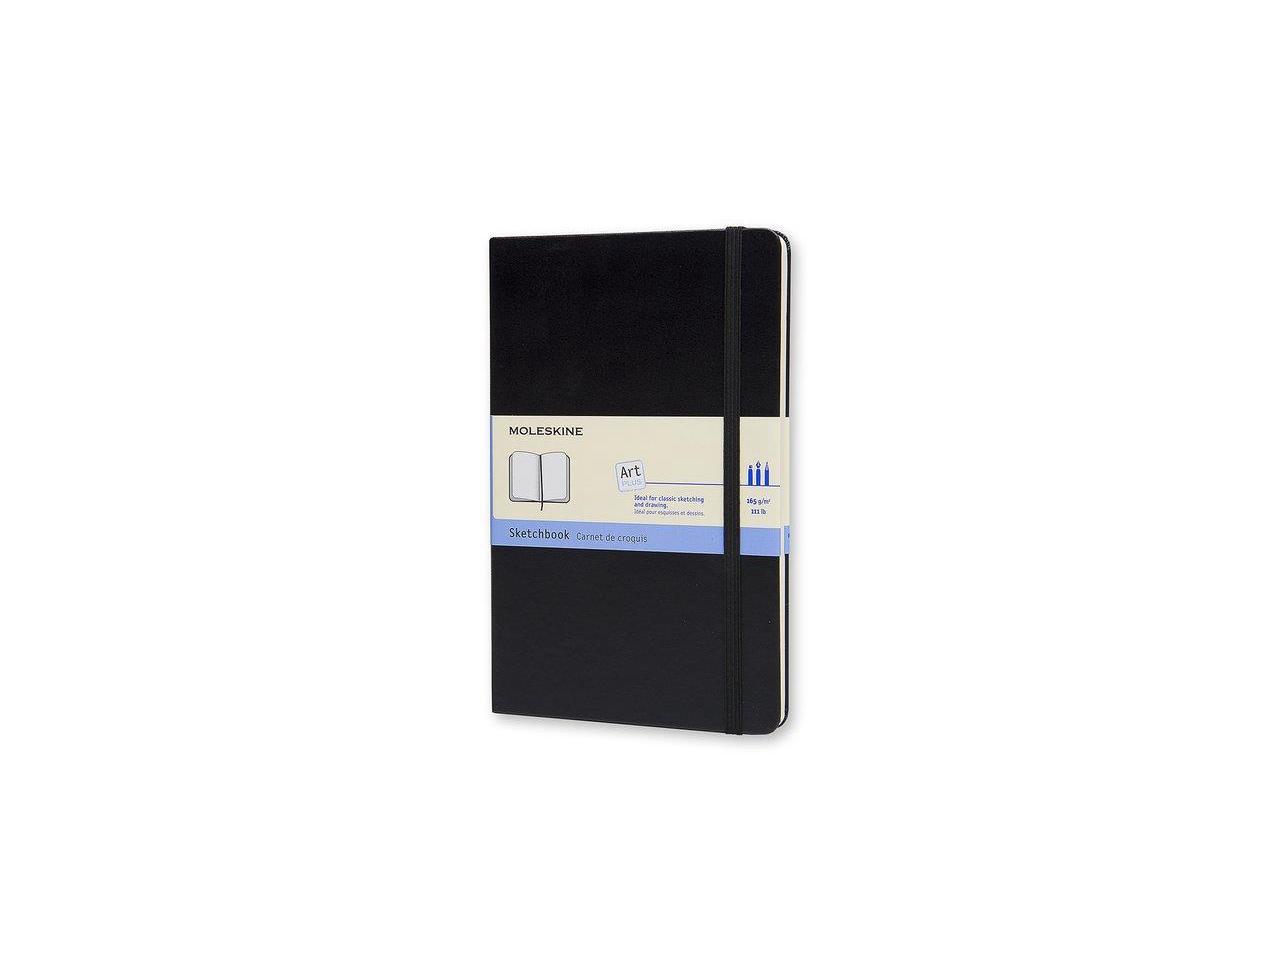 Minimalism Art 100gsm Hard Cover/Fine PU Leather Blue Designed in San Francisco Quality Paper 192 Pages Classic Notebook Journal Plain/Blank Page Inner Pocket A5 Size: 5 X 8.3